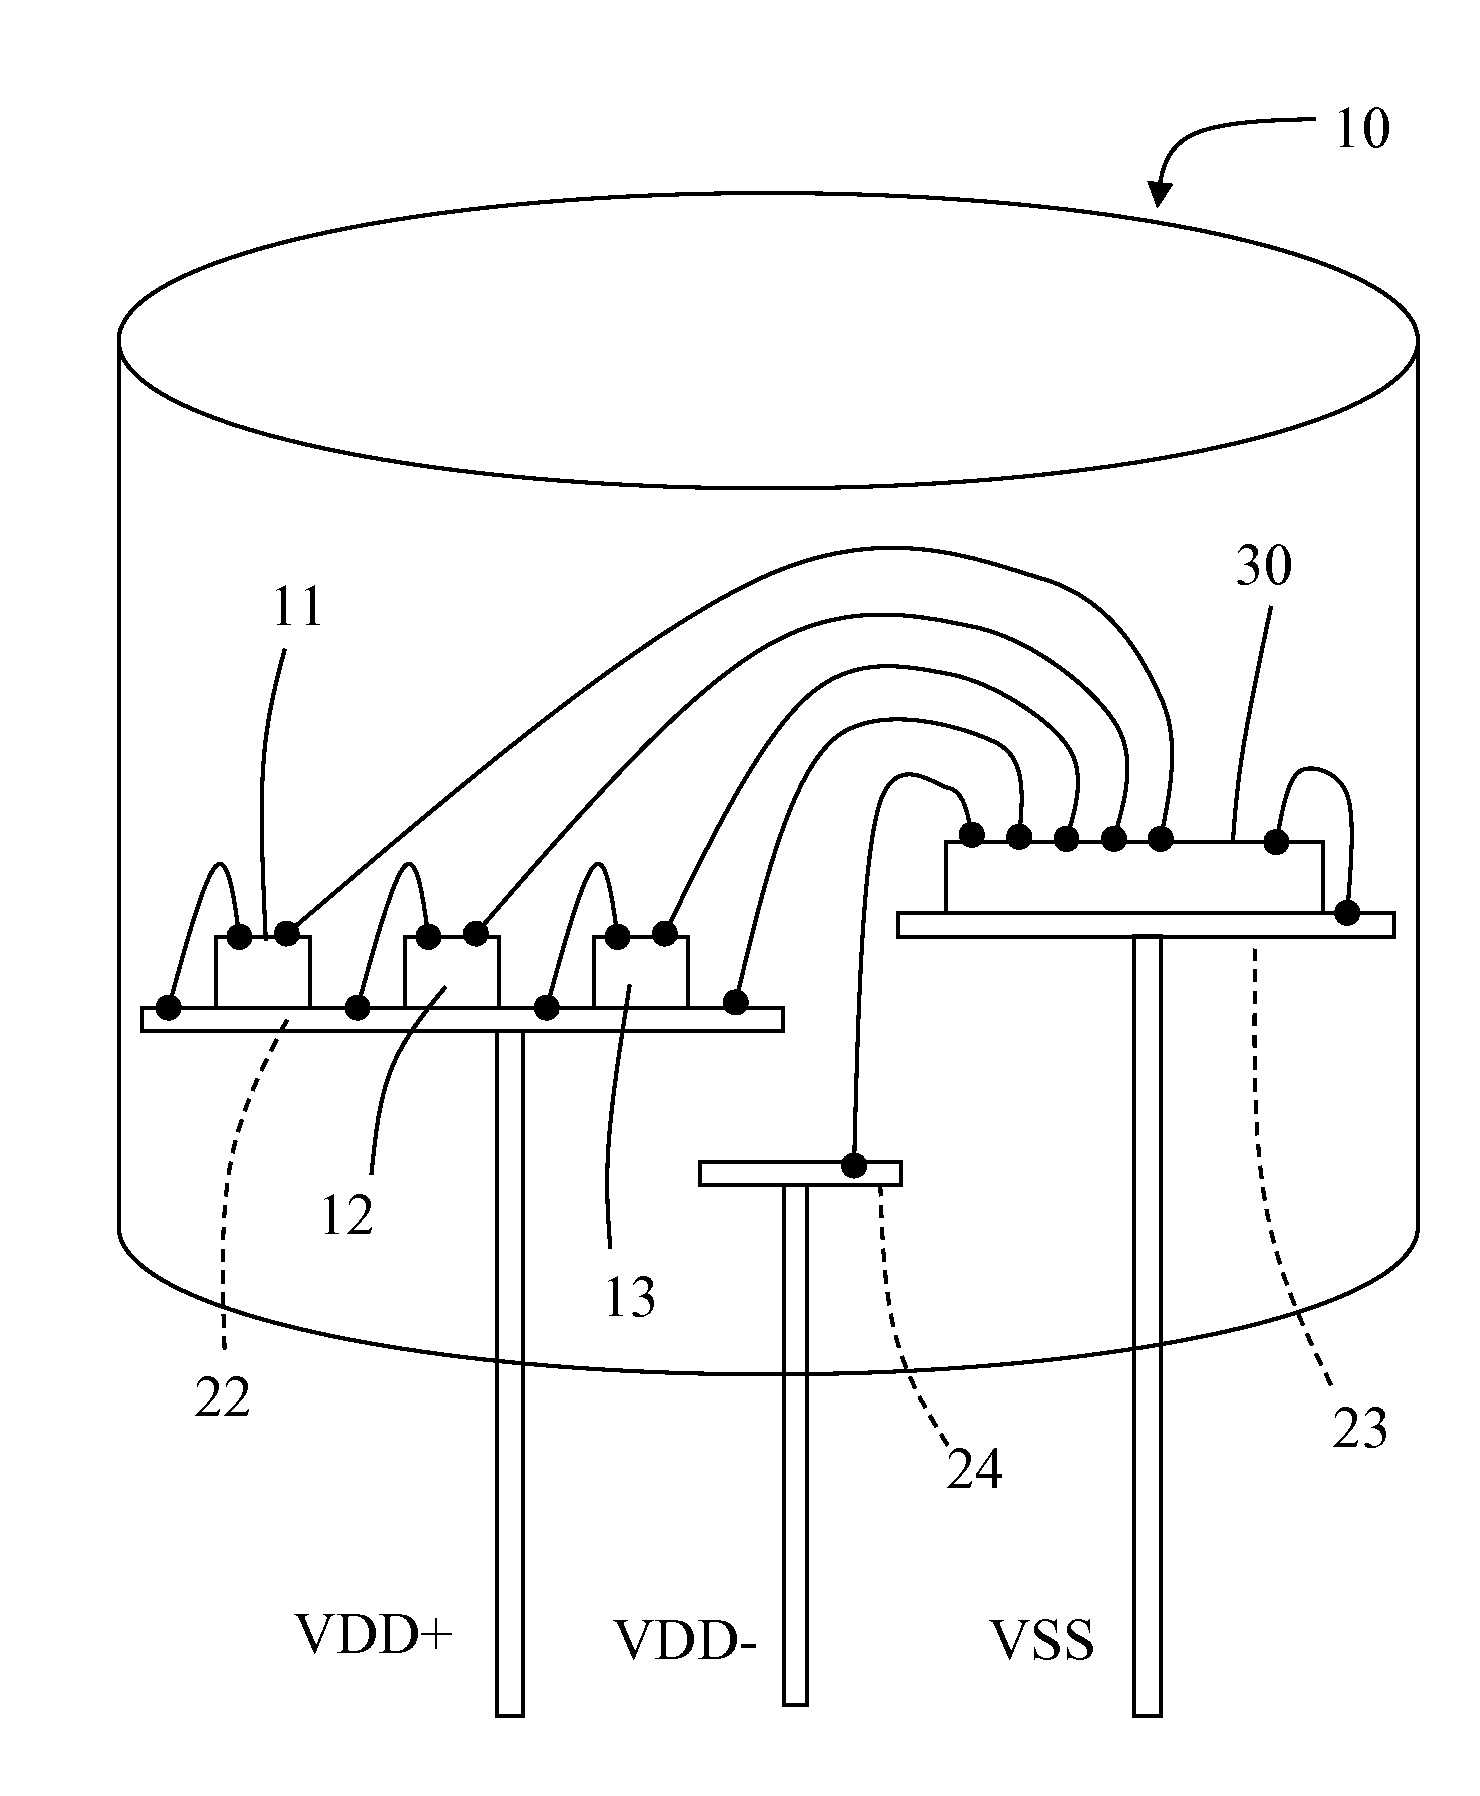 LED package structure with an integrated pin to transmit operation power and control signals